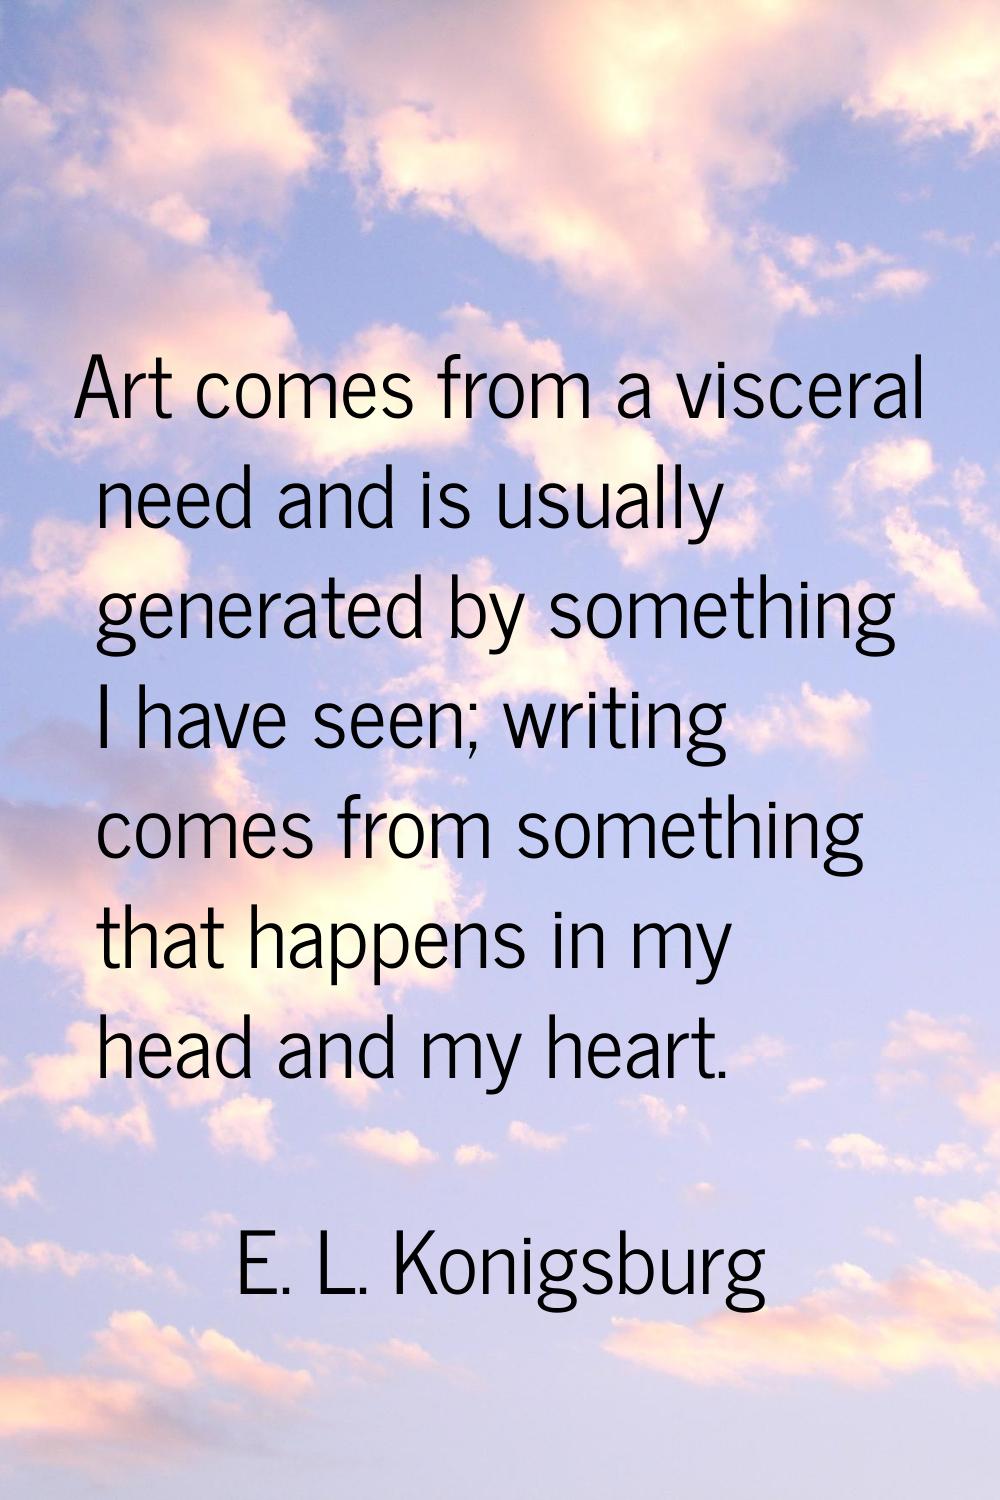 Art comes from a visceral need and is usually generated by something I have seen; writing comes fro